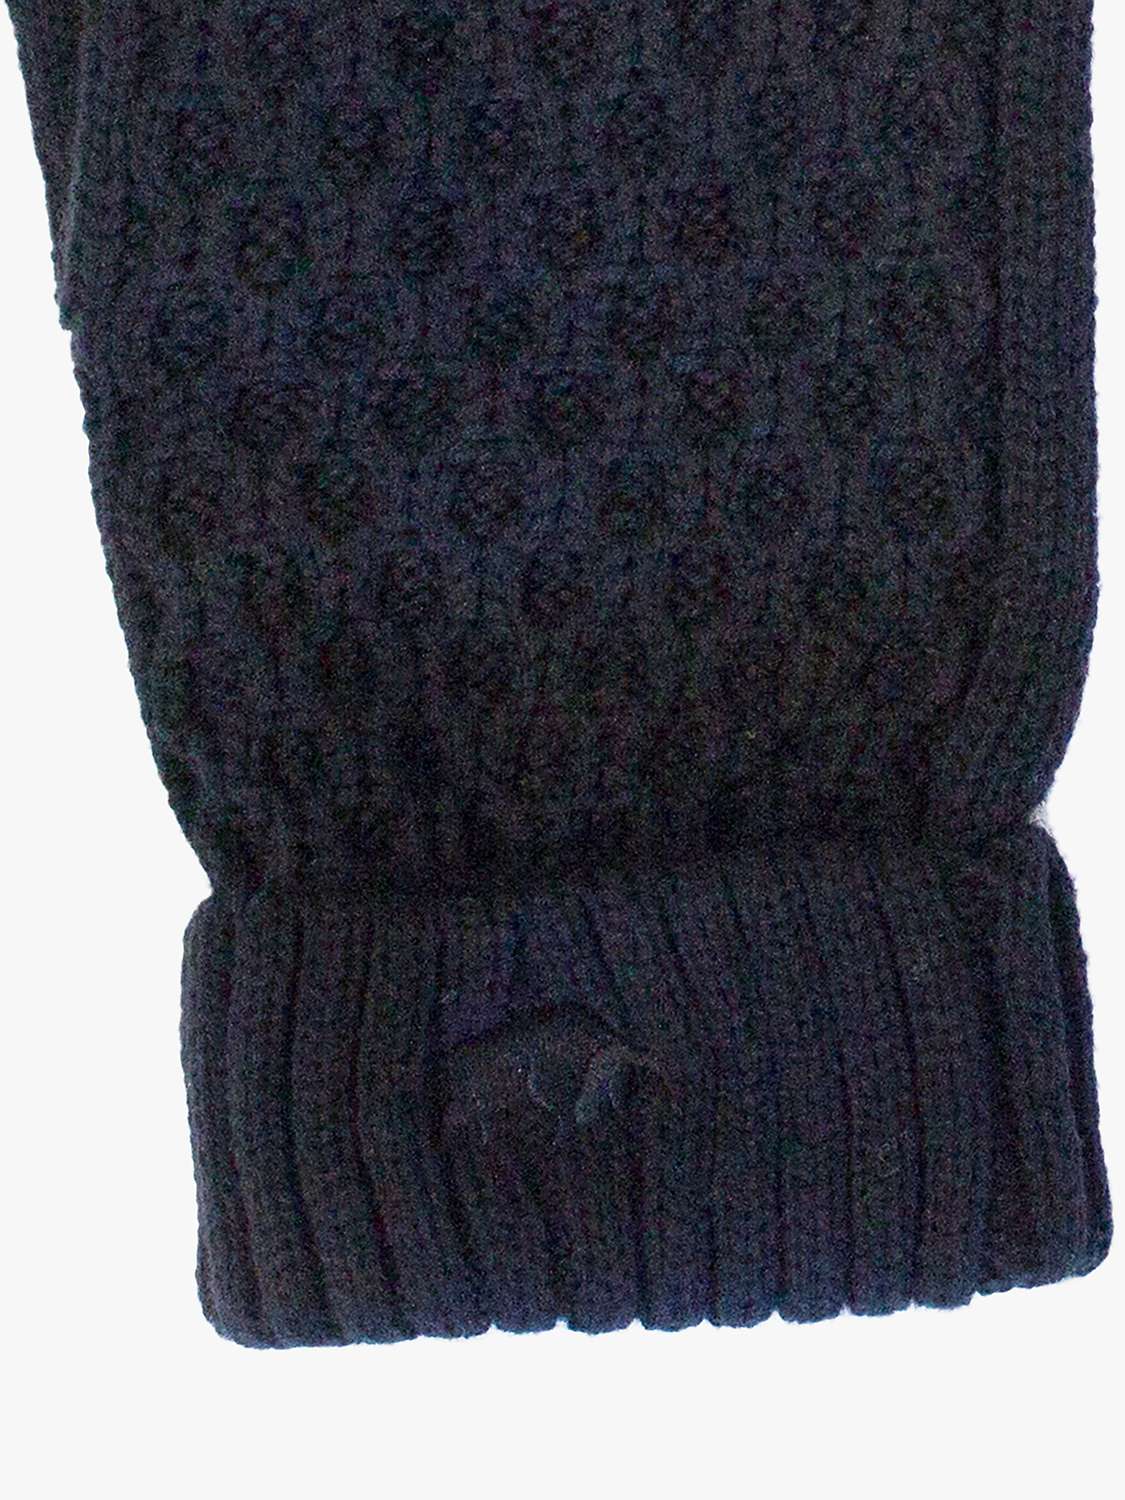 Buy Raging Bull Cable Knit Gloves Online at johnlewis.com